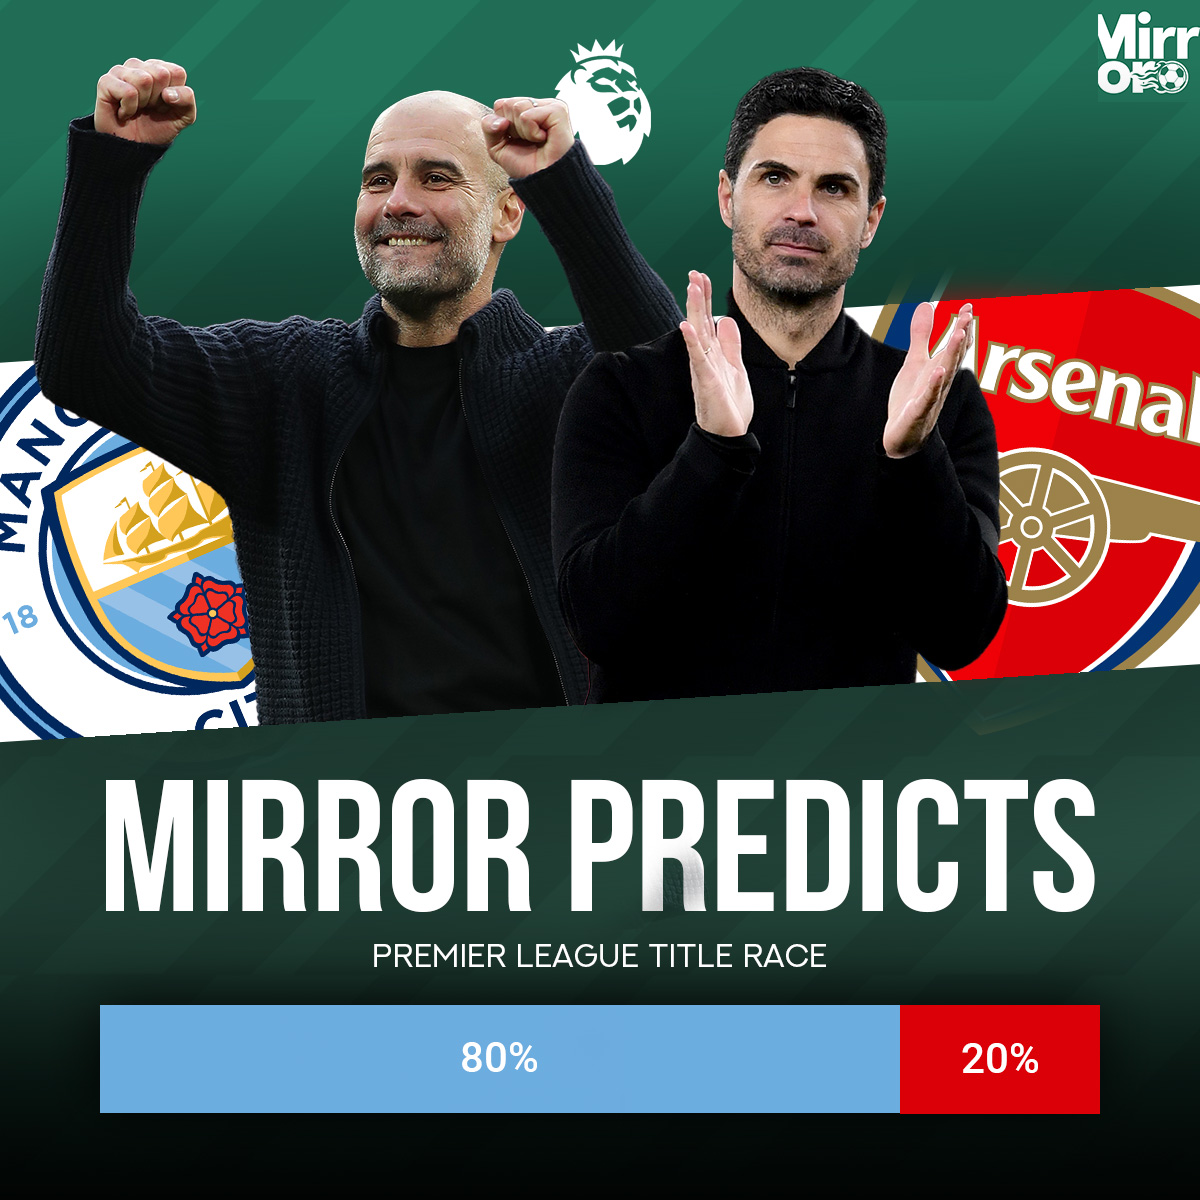 🆚 Manchester City vs West Ham United 🆚 Arsenal vs Everton The #PremierLeague title race comes to an end 🏆🔜 🗓️ Sunday, May 19 at 4pm Our Mirror Football team have predicted who will be lifting the Premier League trophy this weekend 🔮👀 #MirrorPredicts